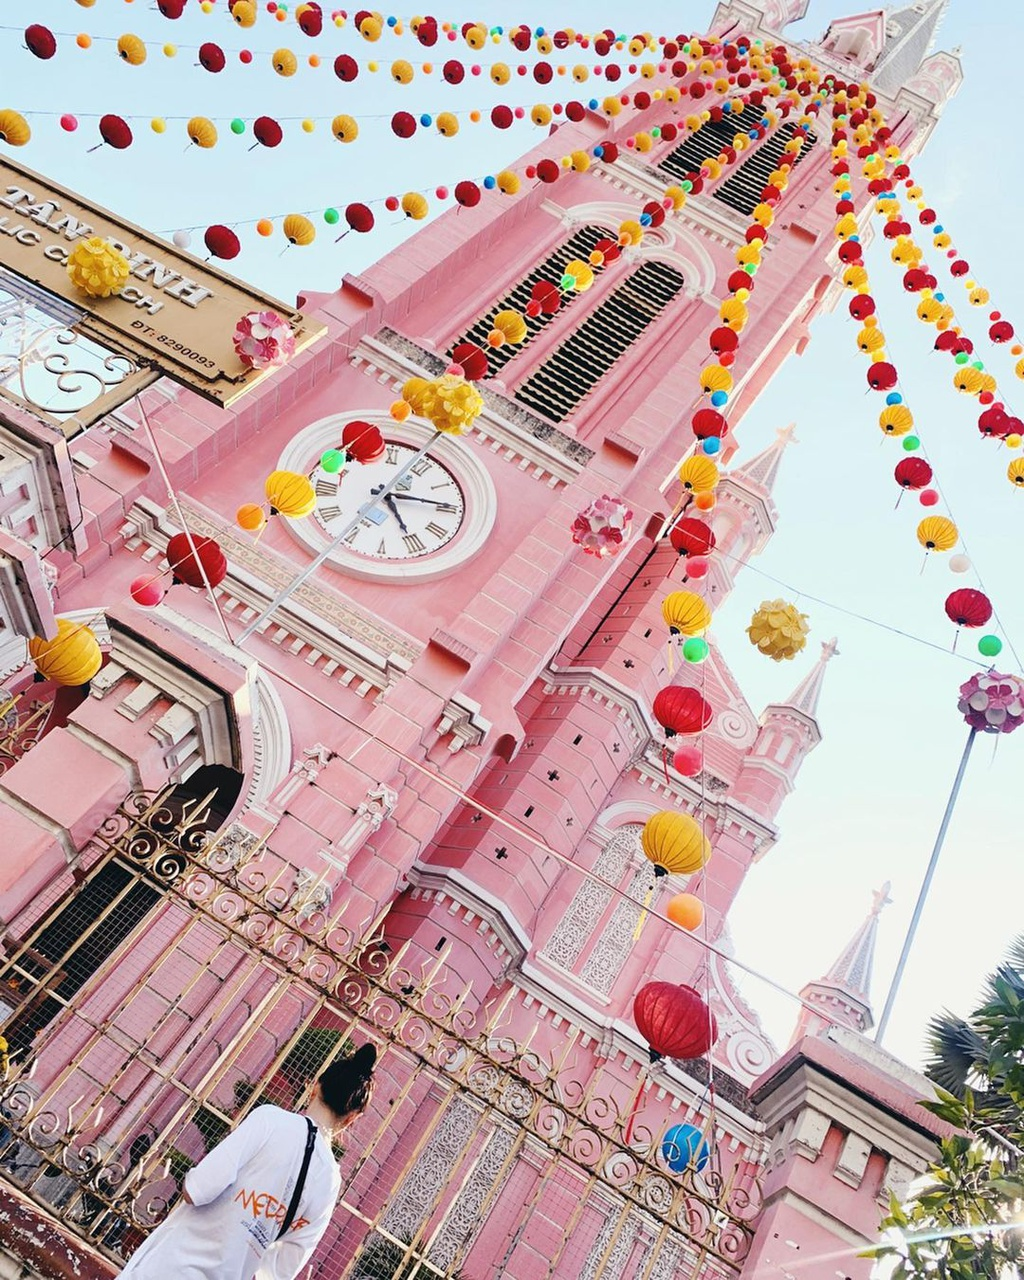 hundred year old churches loved as stunning check in sites in hcmc